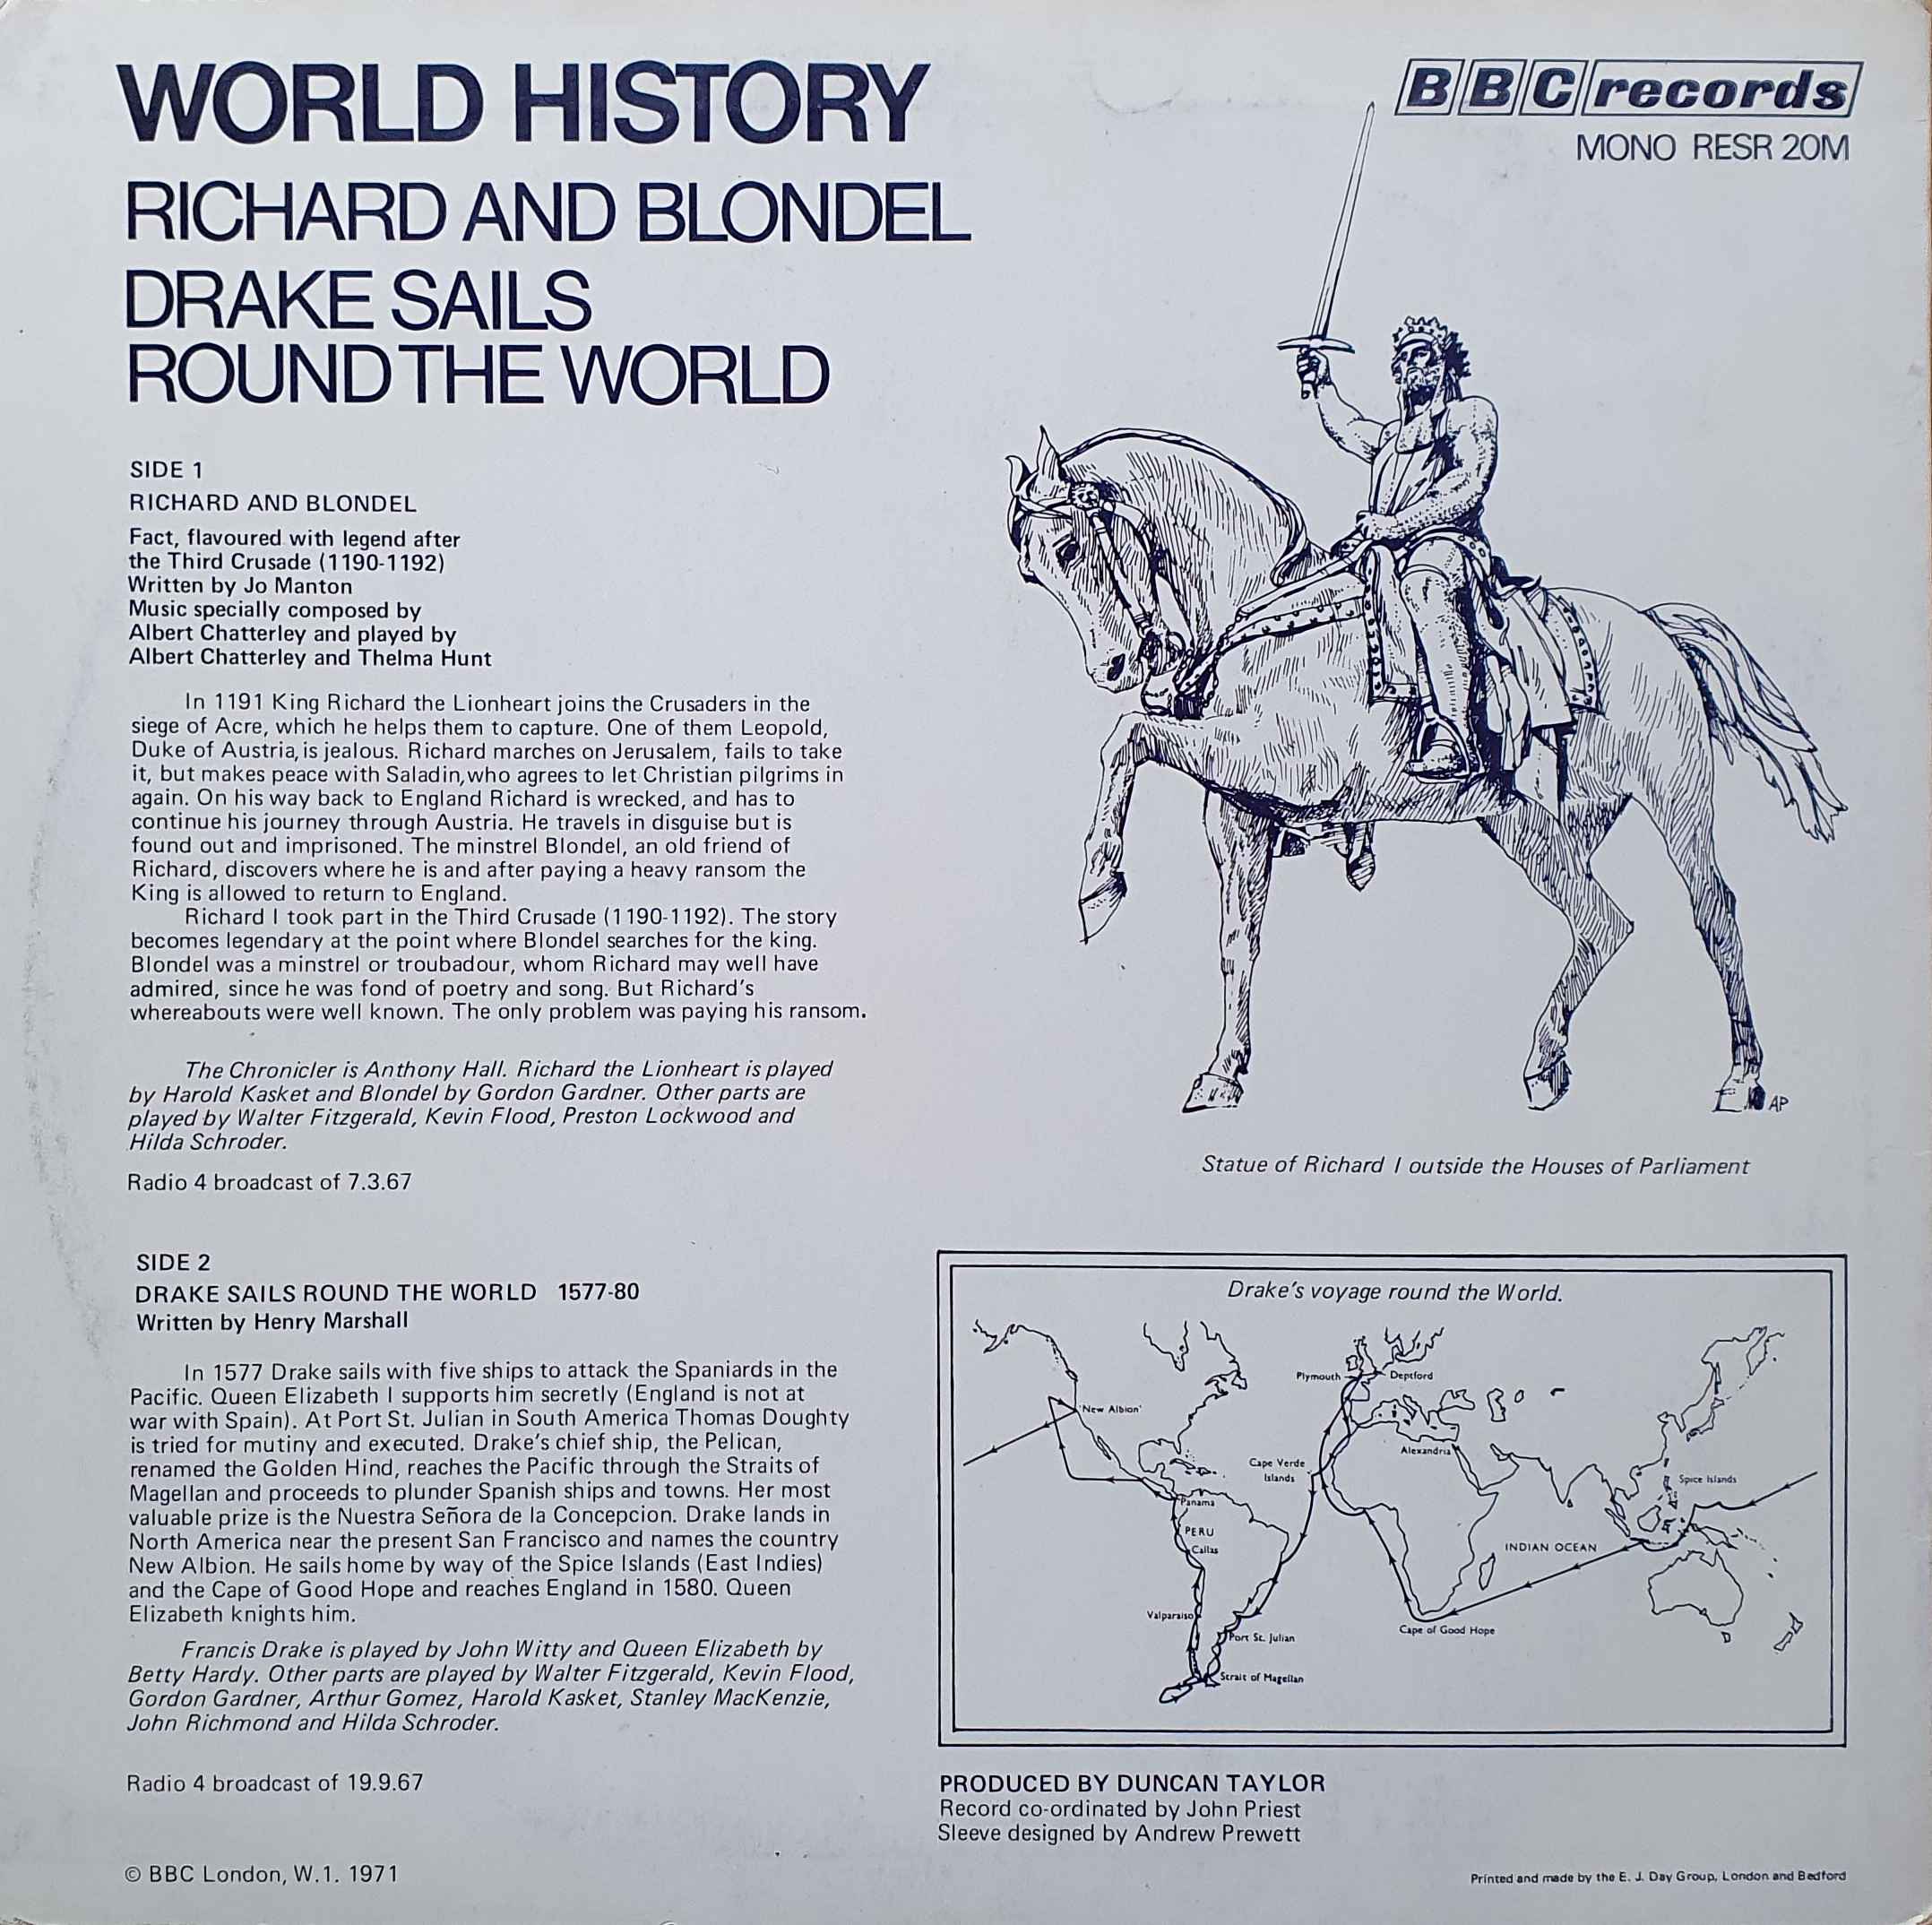 Picture of RESR 20 World History: Richard and Blondel / Drake sails the World by artist Jo Manton / Henry Marshall from the BBC records and Tapes library